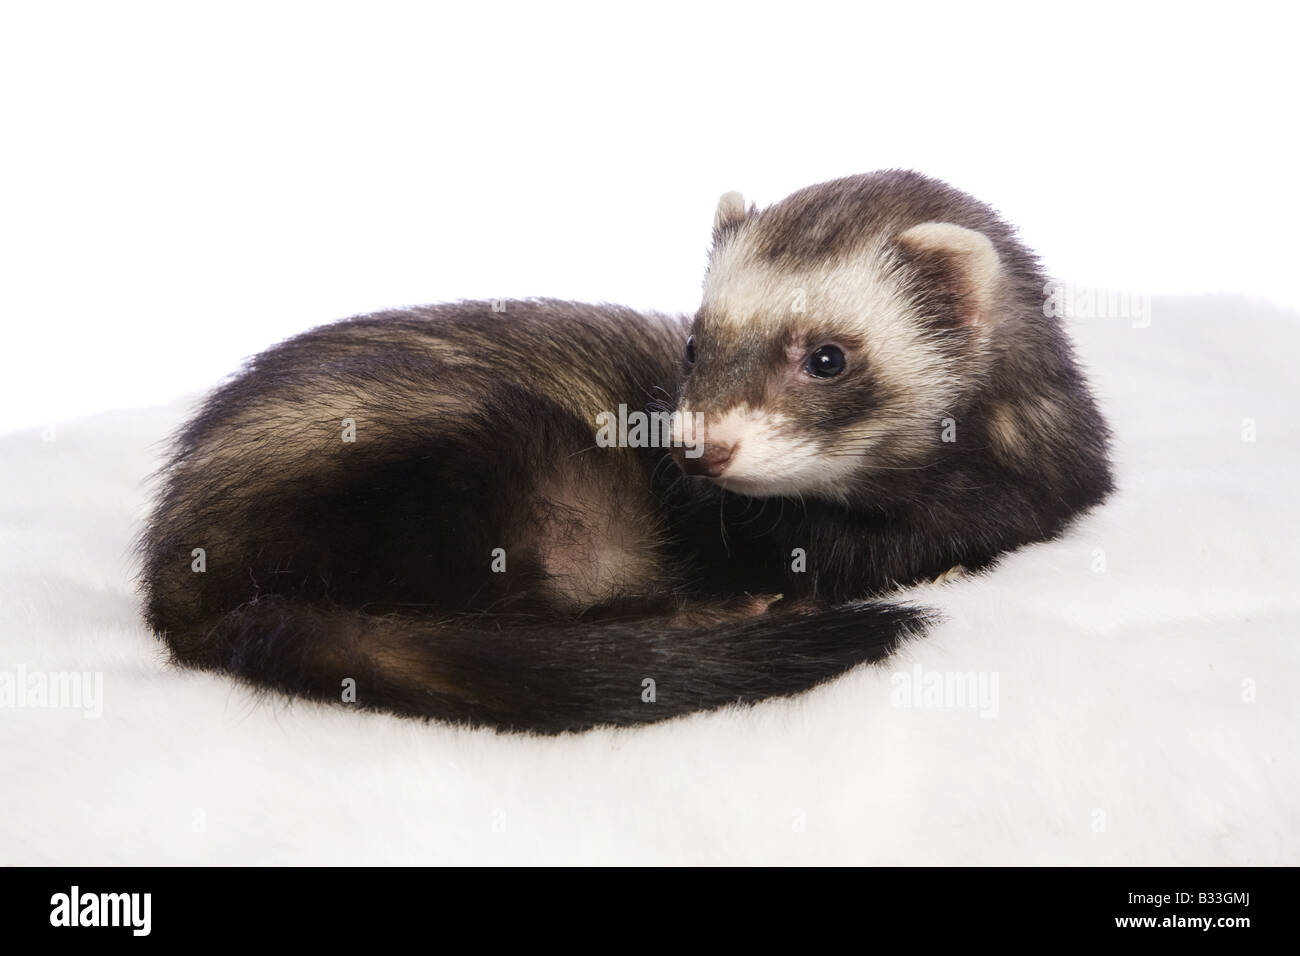 Cute sable ferret lying on white fur bed isolated on white background Stock Photo